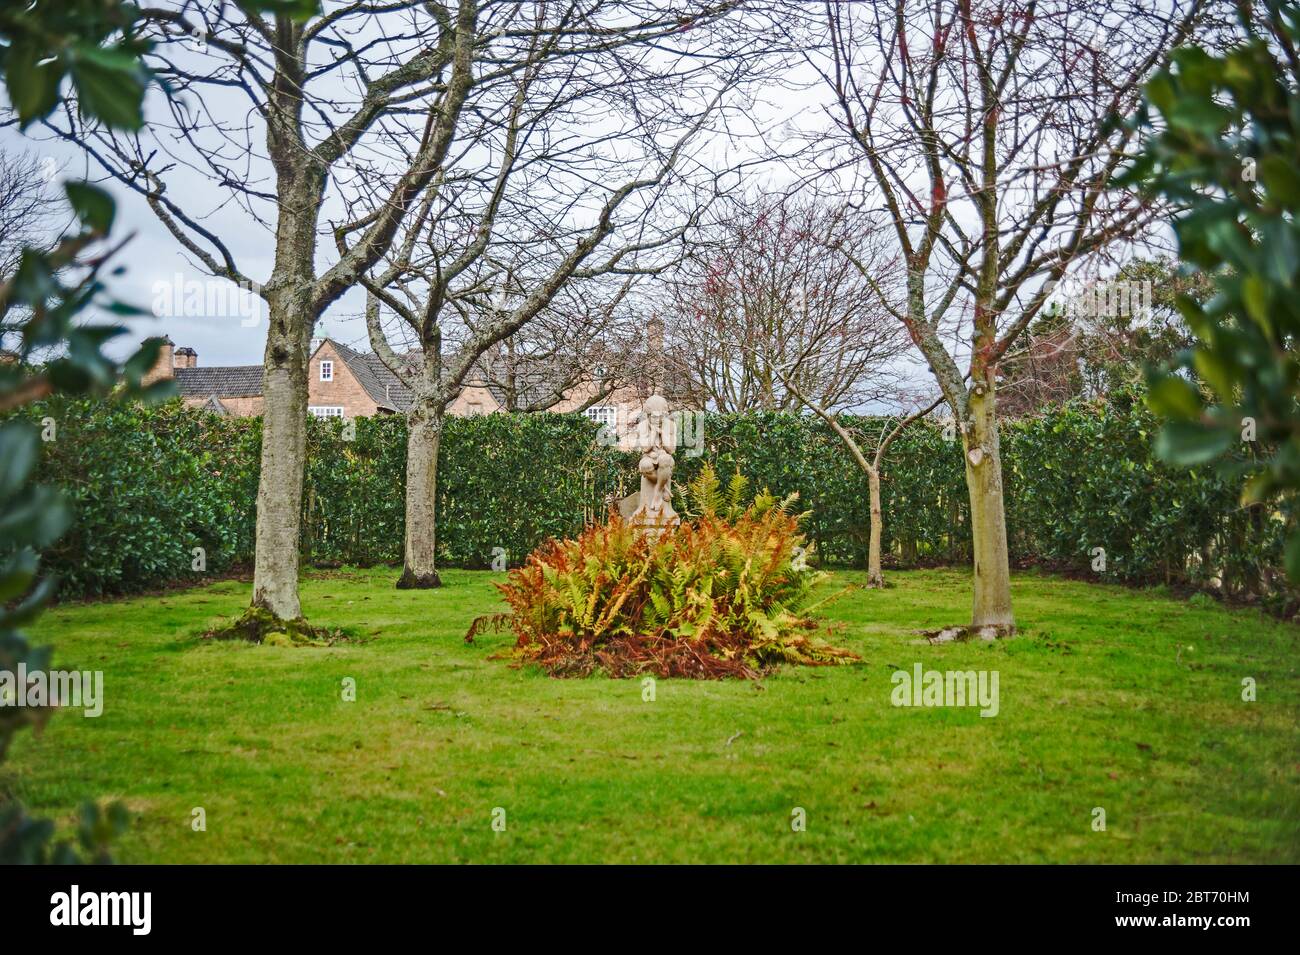 Rear view of Greywalls hotel and gardens with central statue amongst shrubbery, Gullane, East Lothian, Scotland, UK Stock Photo